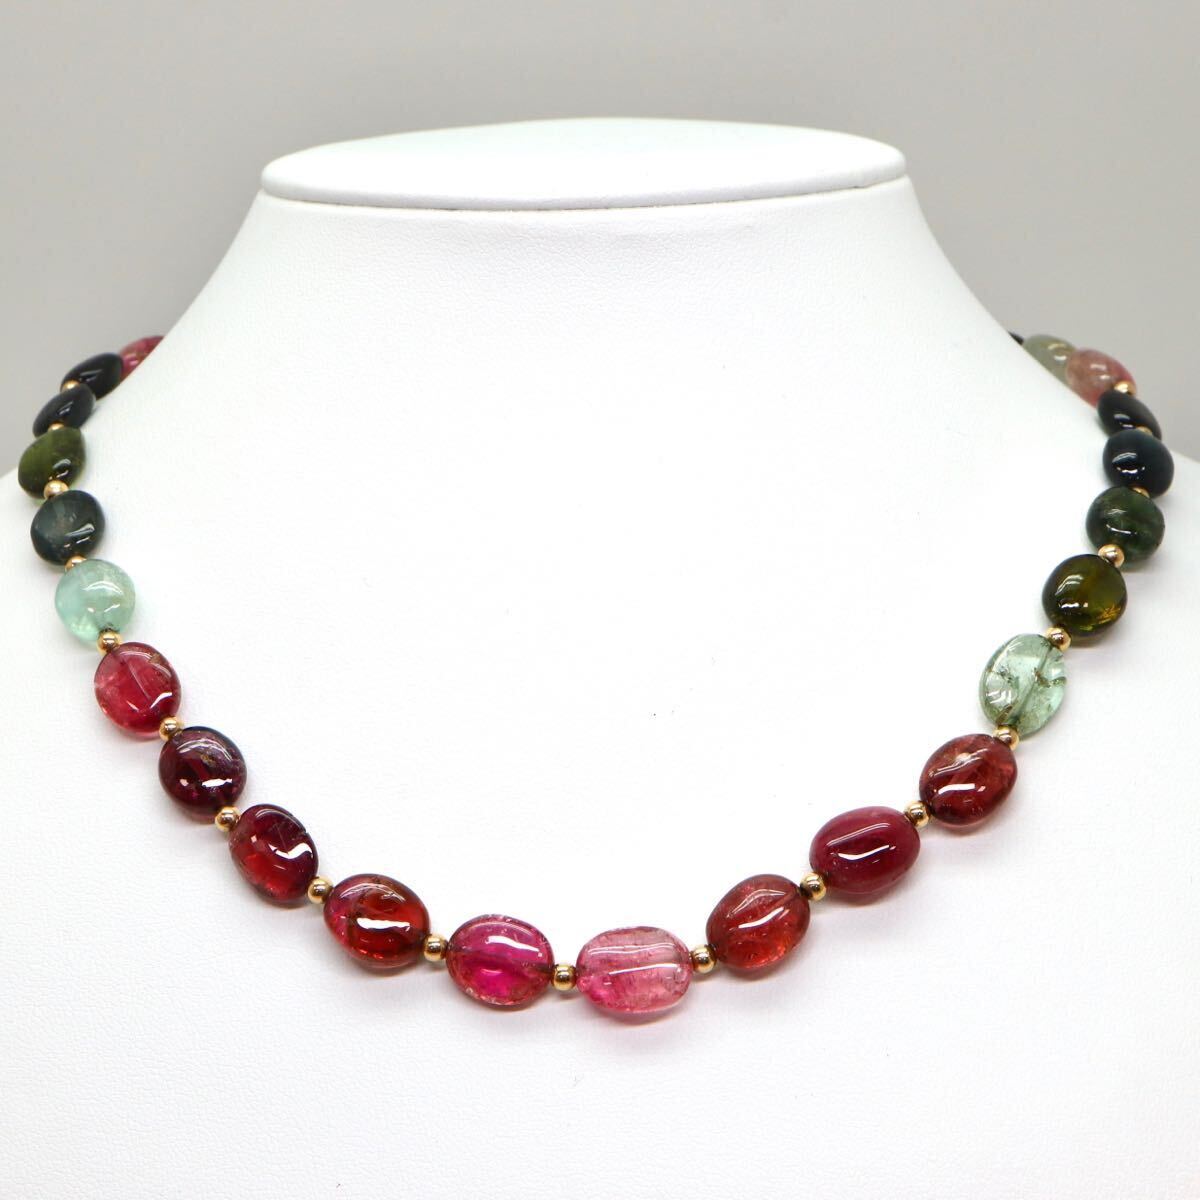  gorgeous!! large grain!!*K18 natural tourmaline necklace *M approximately 34.0g approximately 45.5cm tourmaline jewelry necklace jewelry EA0/EA0